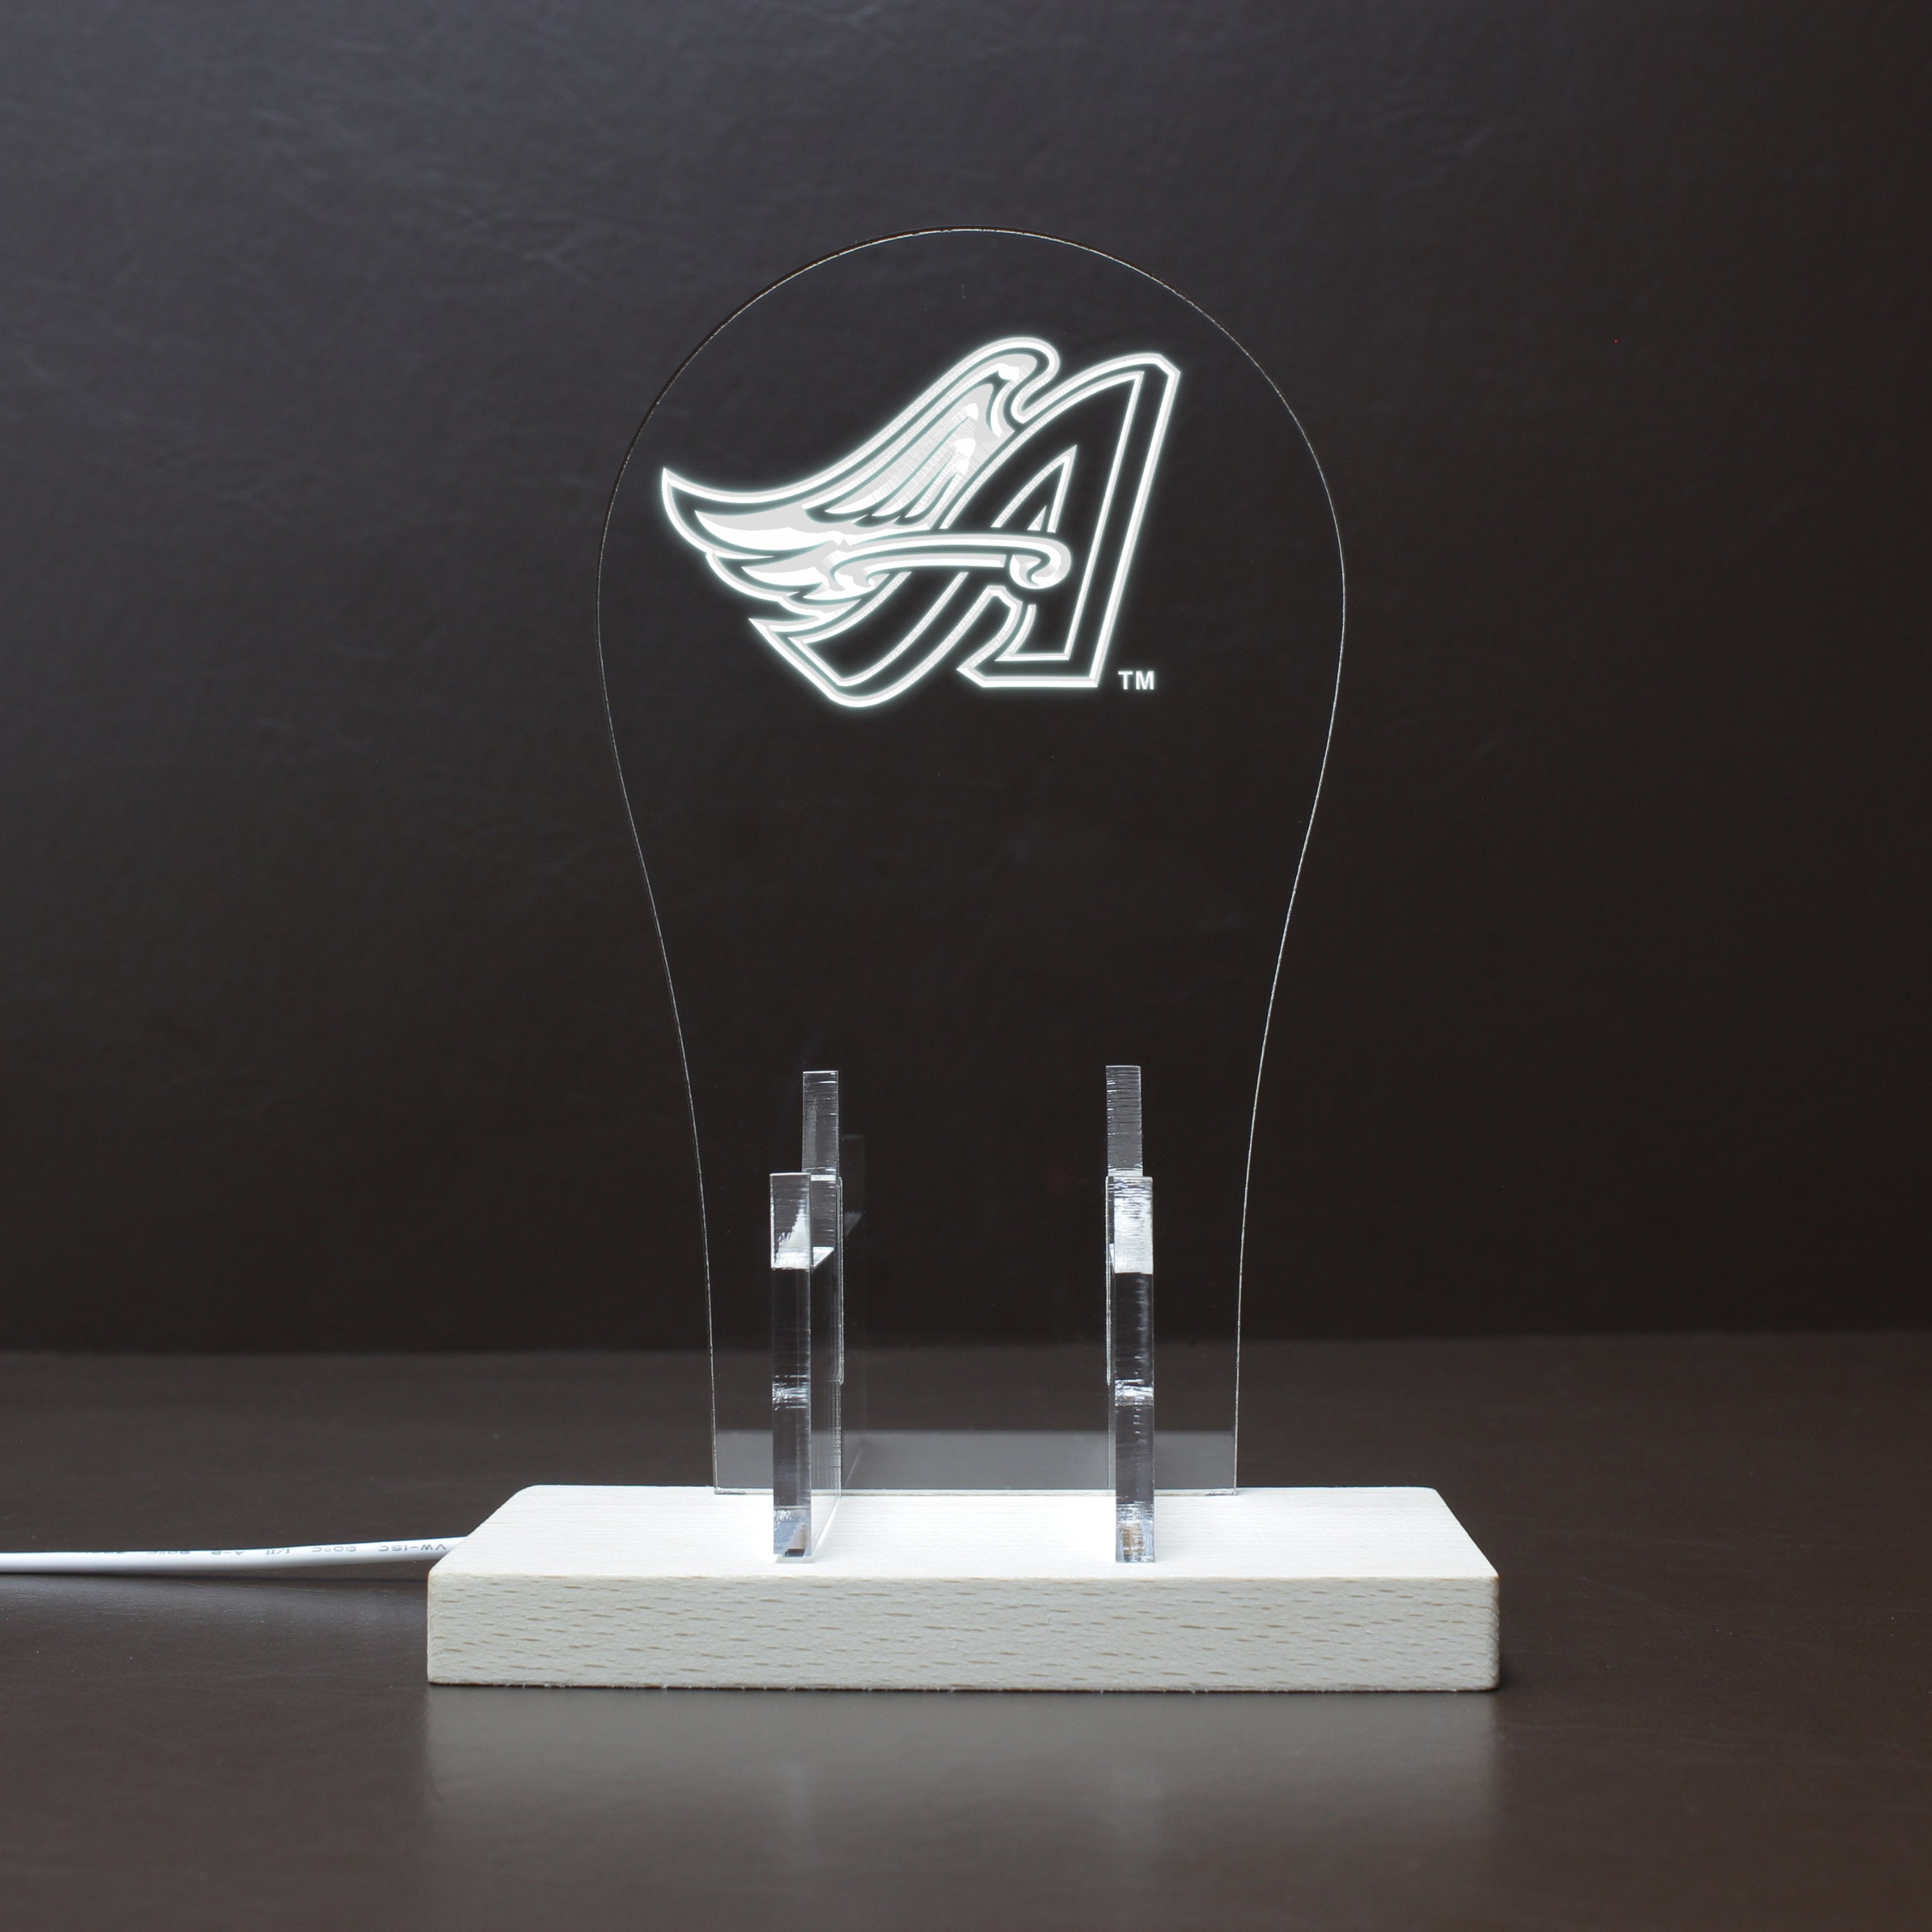 Los Angeles Angels LED Gaming Headset Controller Stand